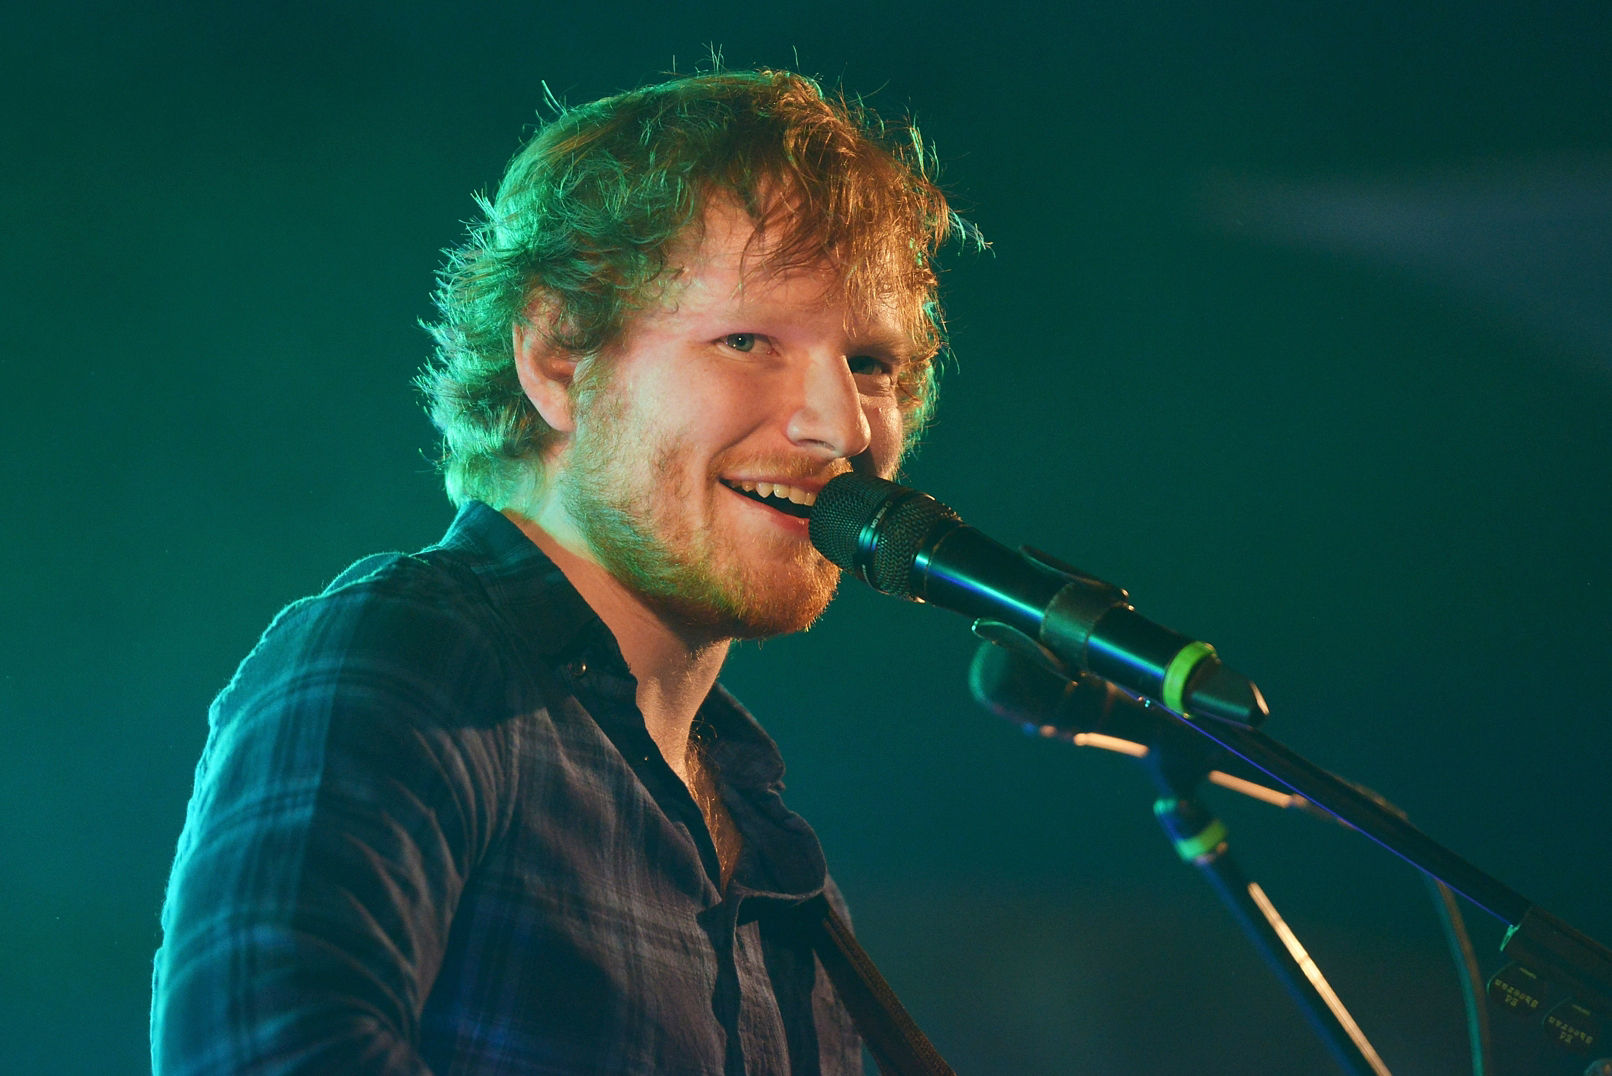 Watch Ed Sheeran's new music video Castle on the Hill